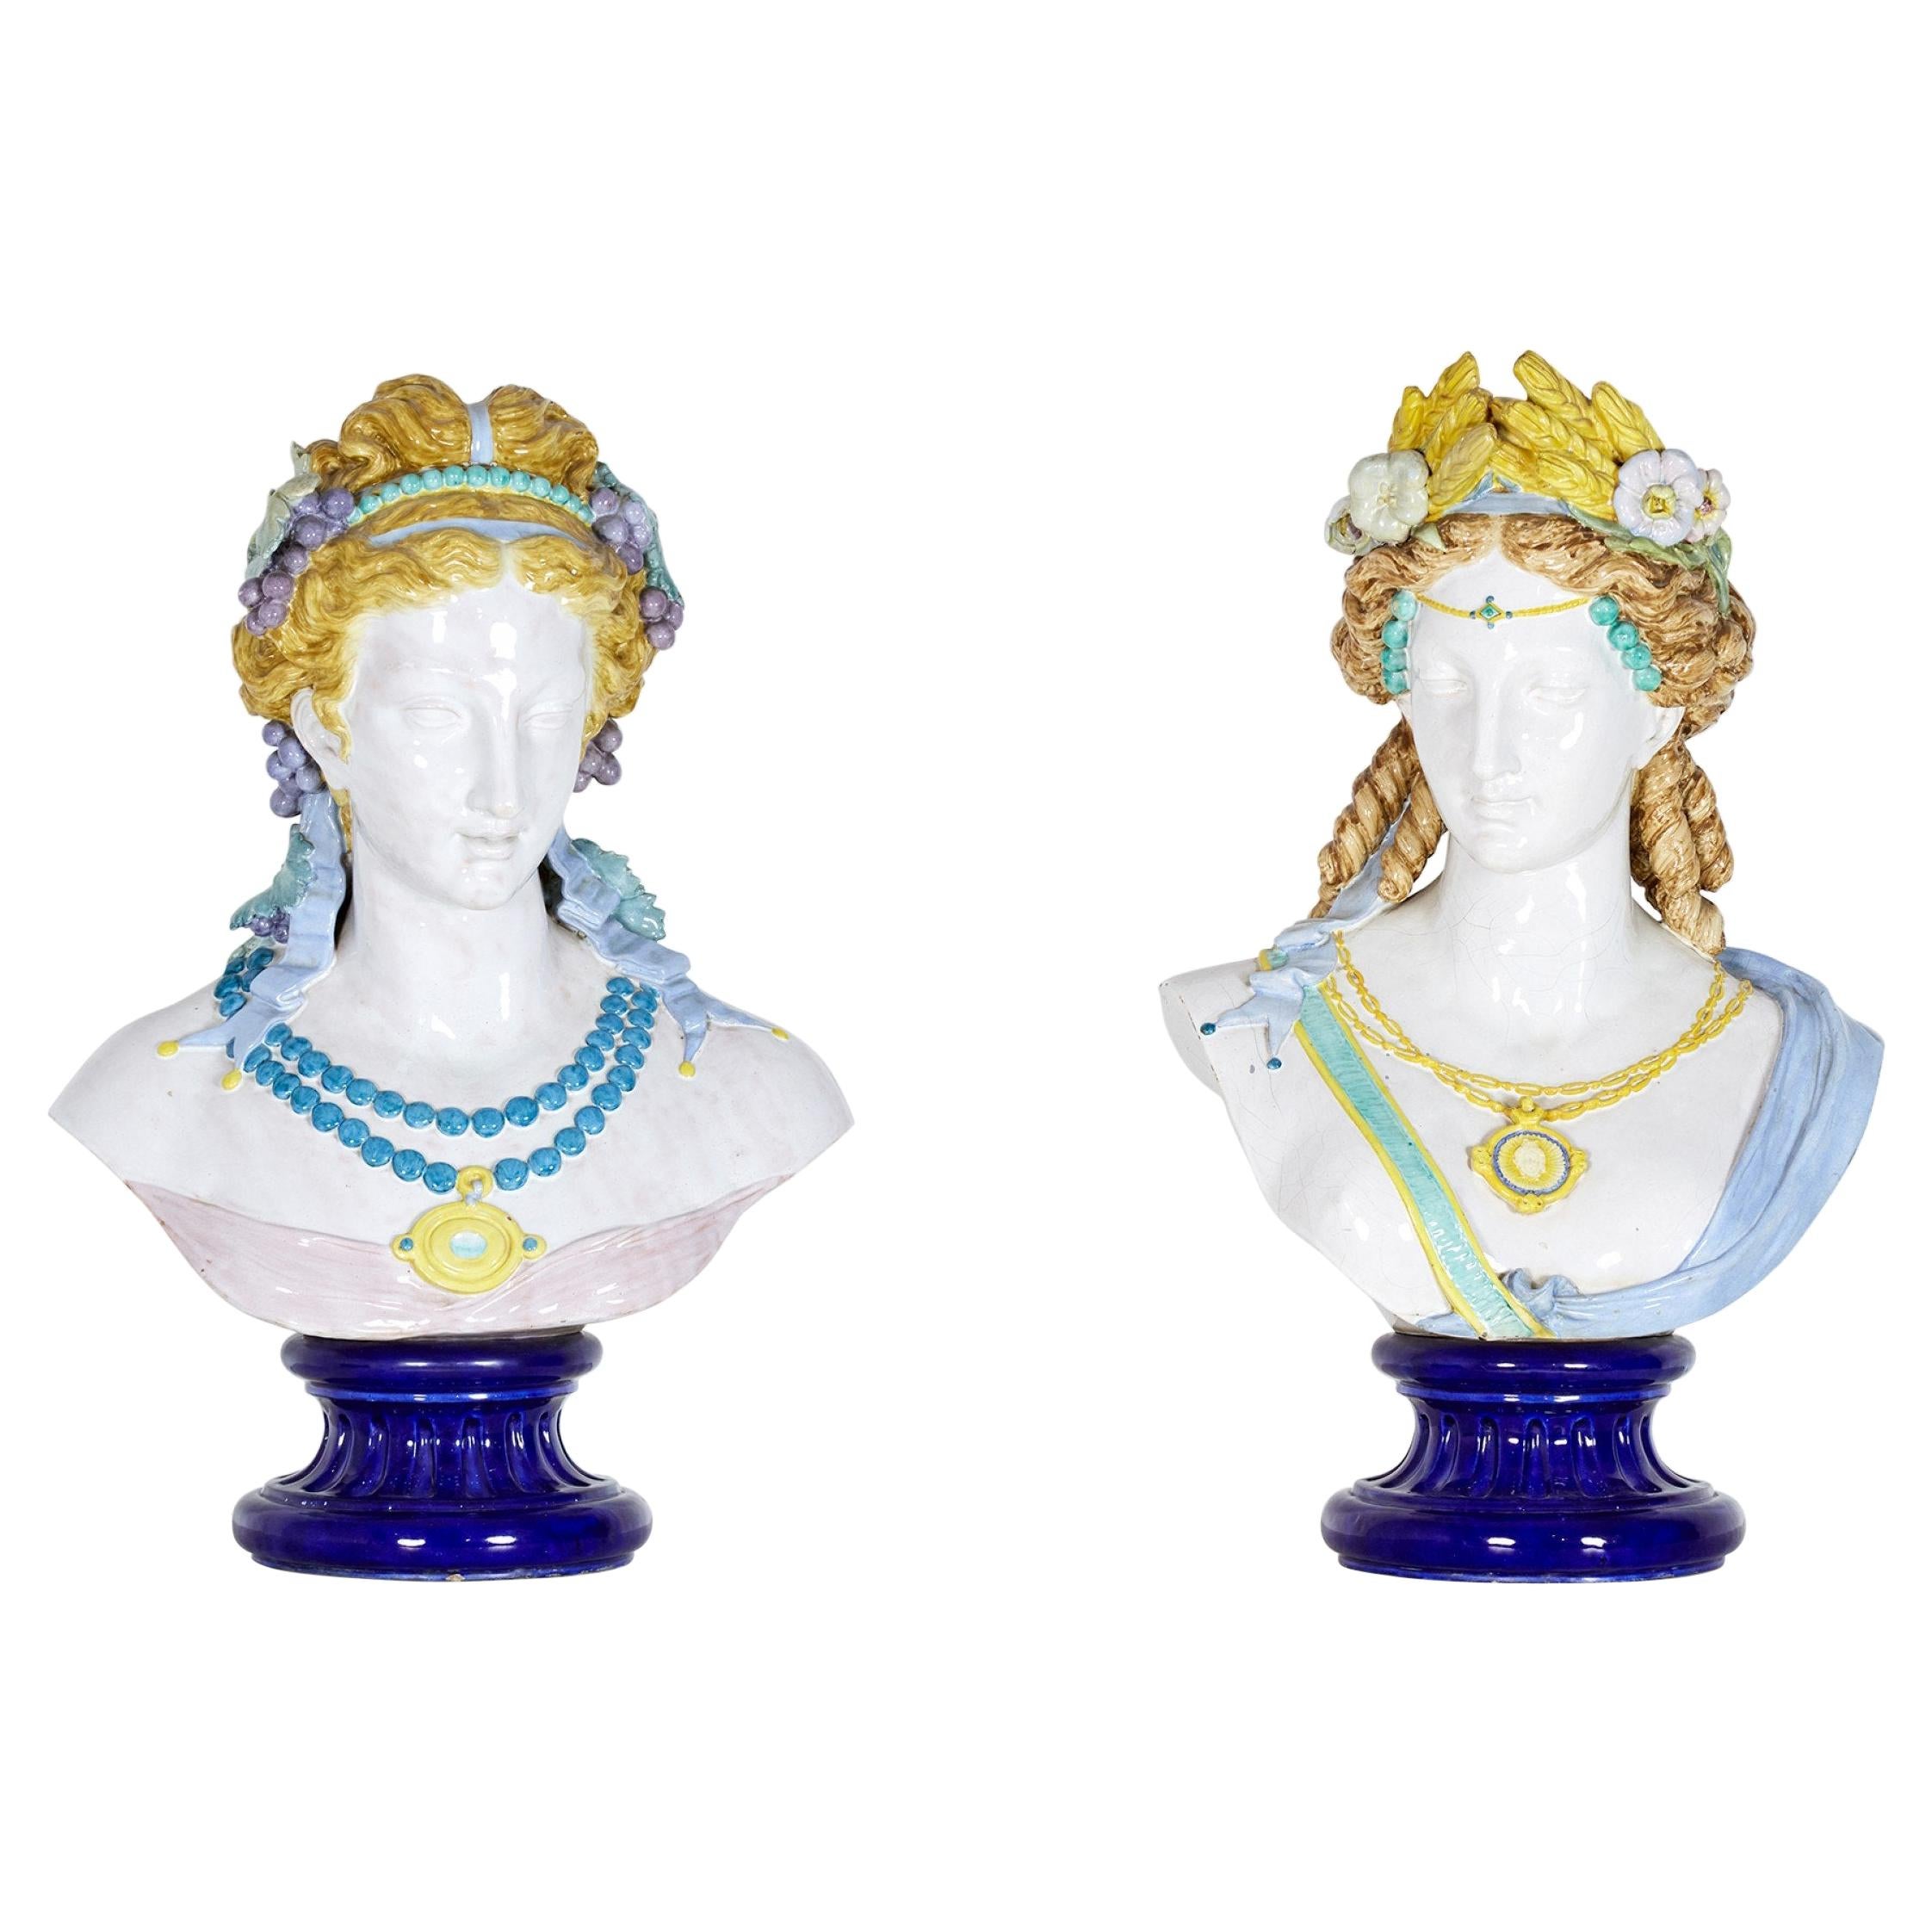 Pair of French Empire Auguste Jean French Monumental Faience Female Busts